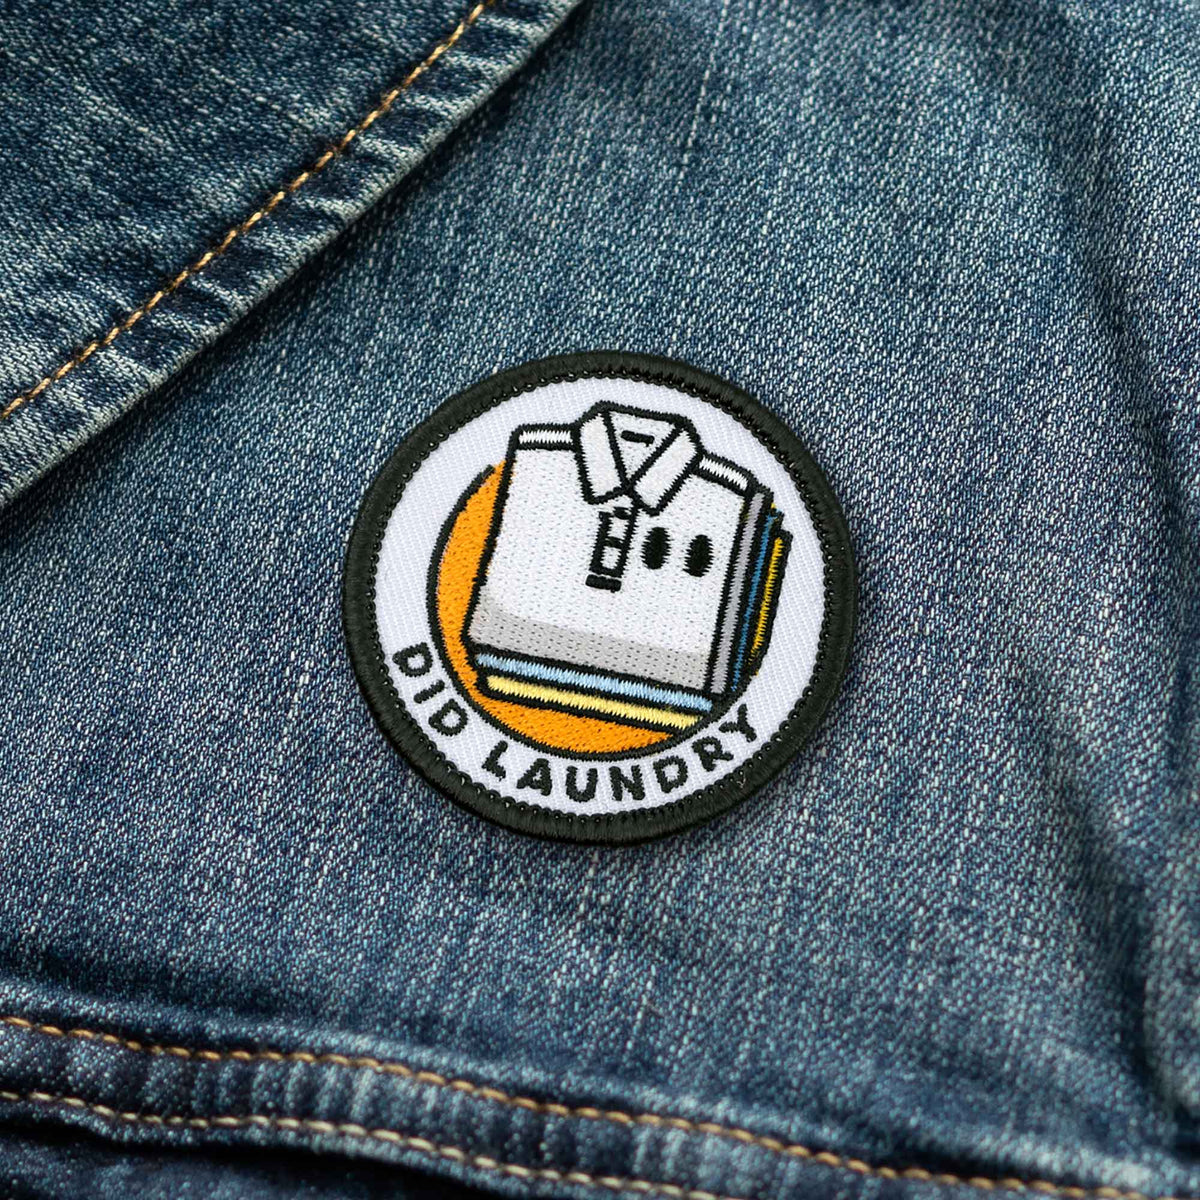 Adulting Merit Badge Embroidered Iron-On Patch (Did Laundry)